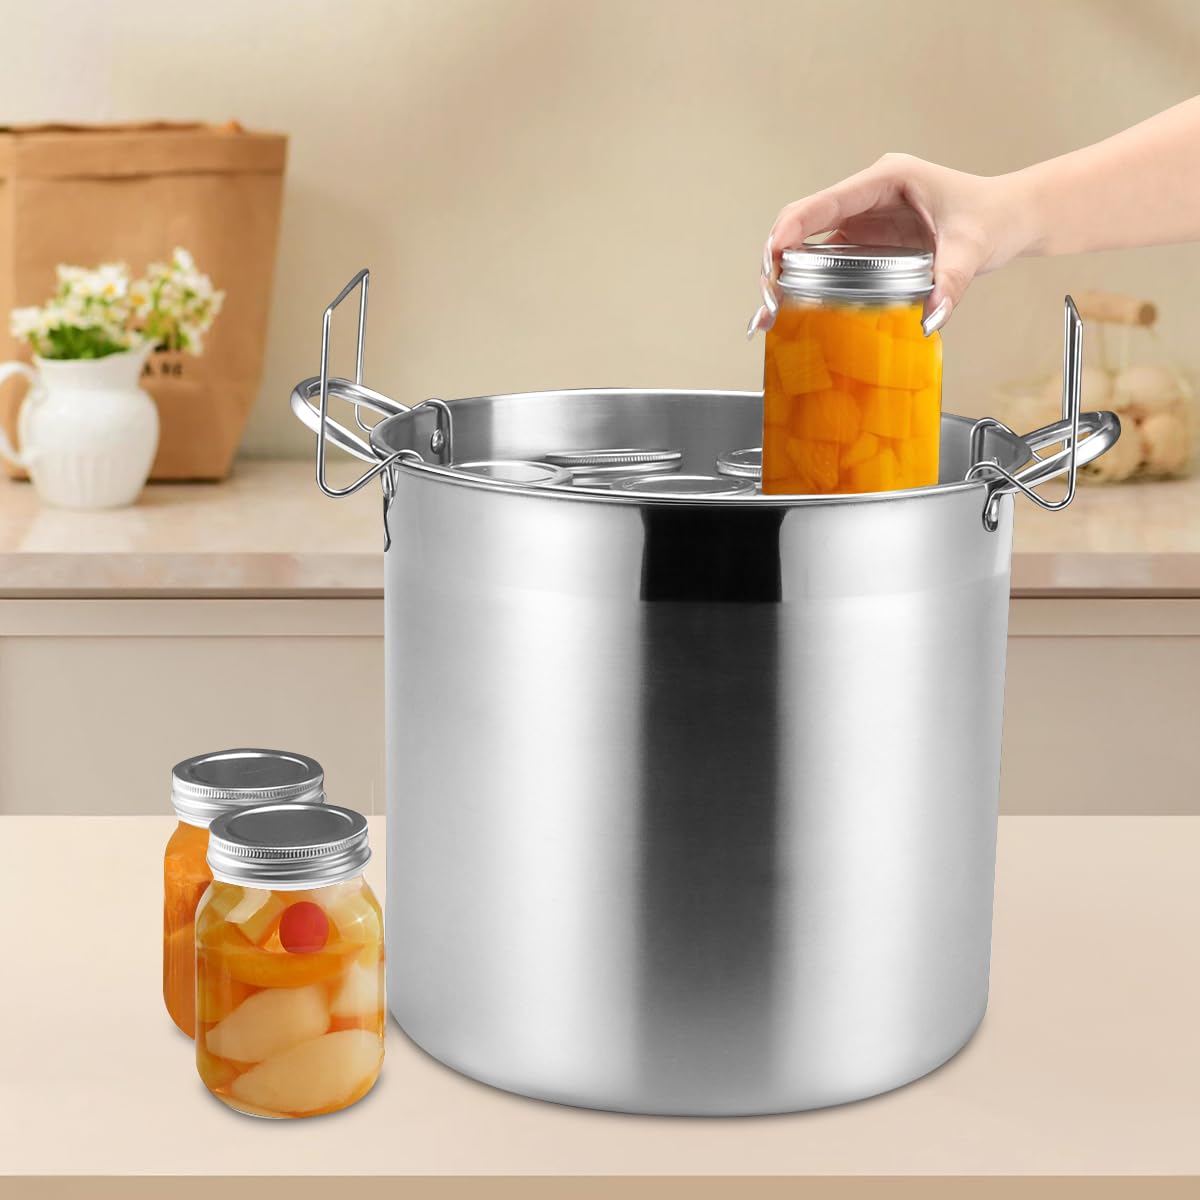 BriSunshine 21.5 QT Stainless Steel Canning Pot with Lid, Rack & 7 Pieces Canning Tools Set, Canning Supplies Kit Water Bath Canner for Beginner